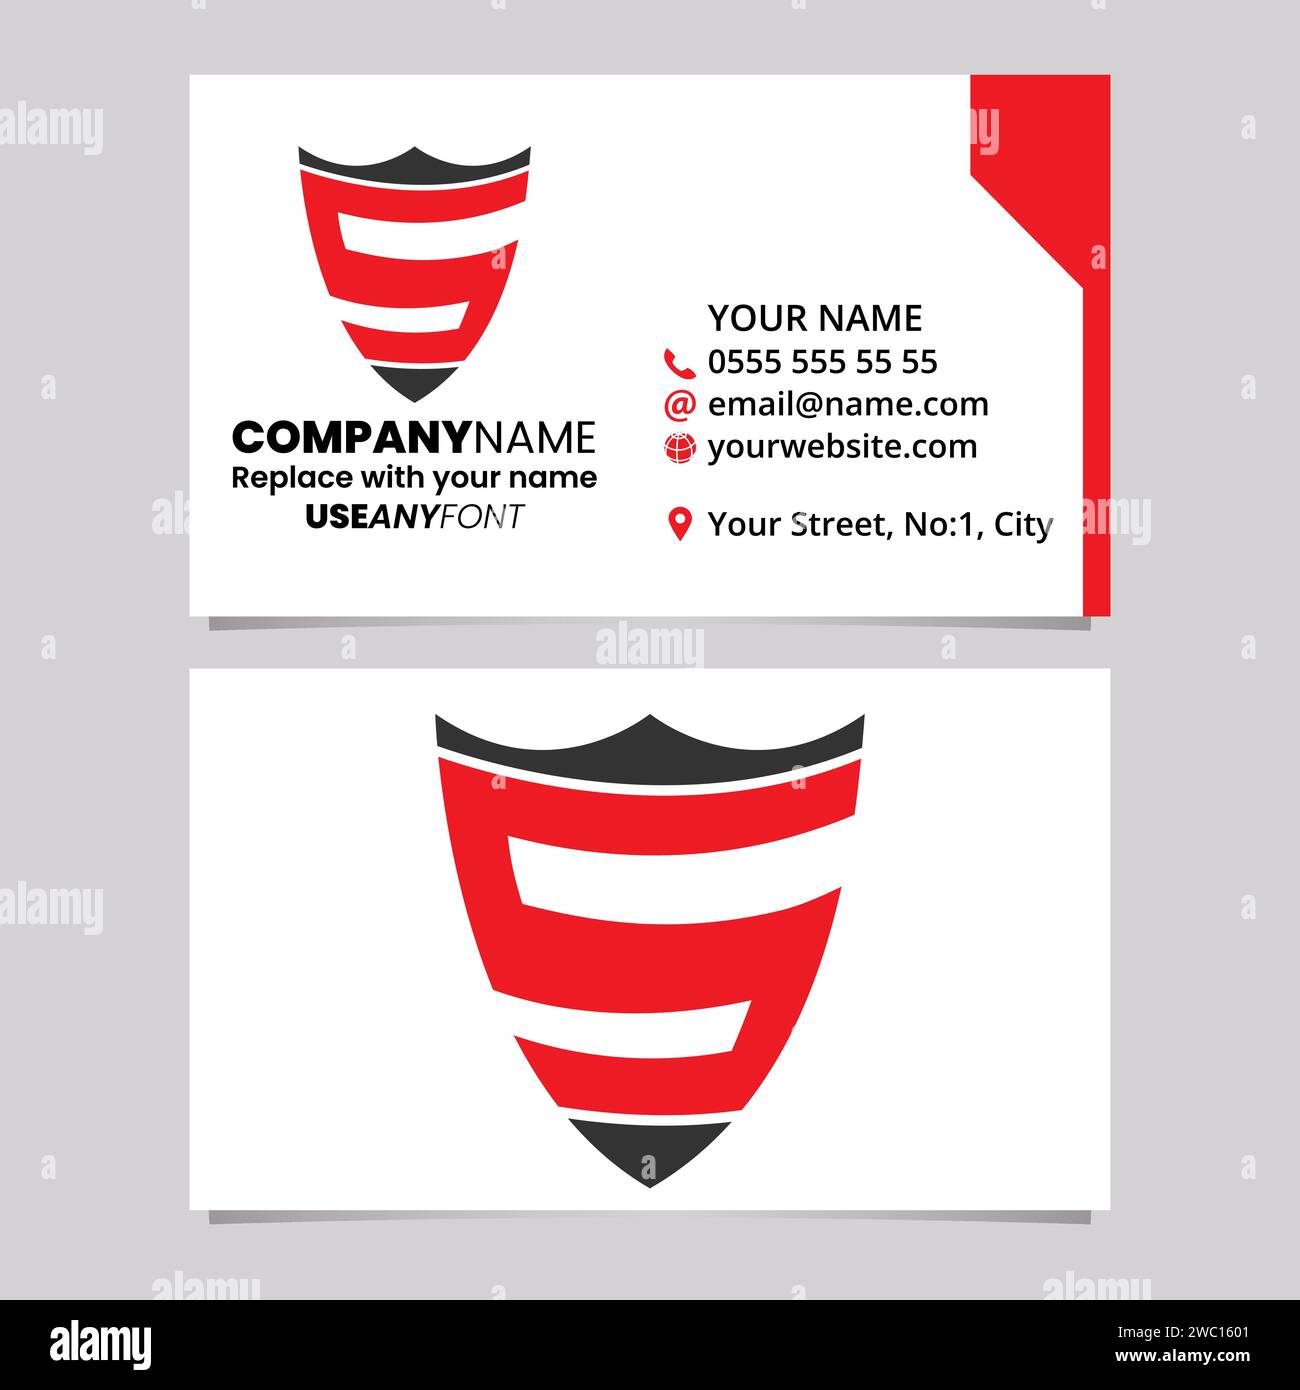 Red and Black Business Card Template with Shield Shaped Letter S Logo Icon Over a Light Grey Background Stock Vector